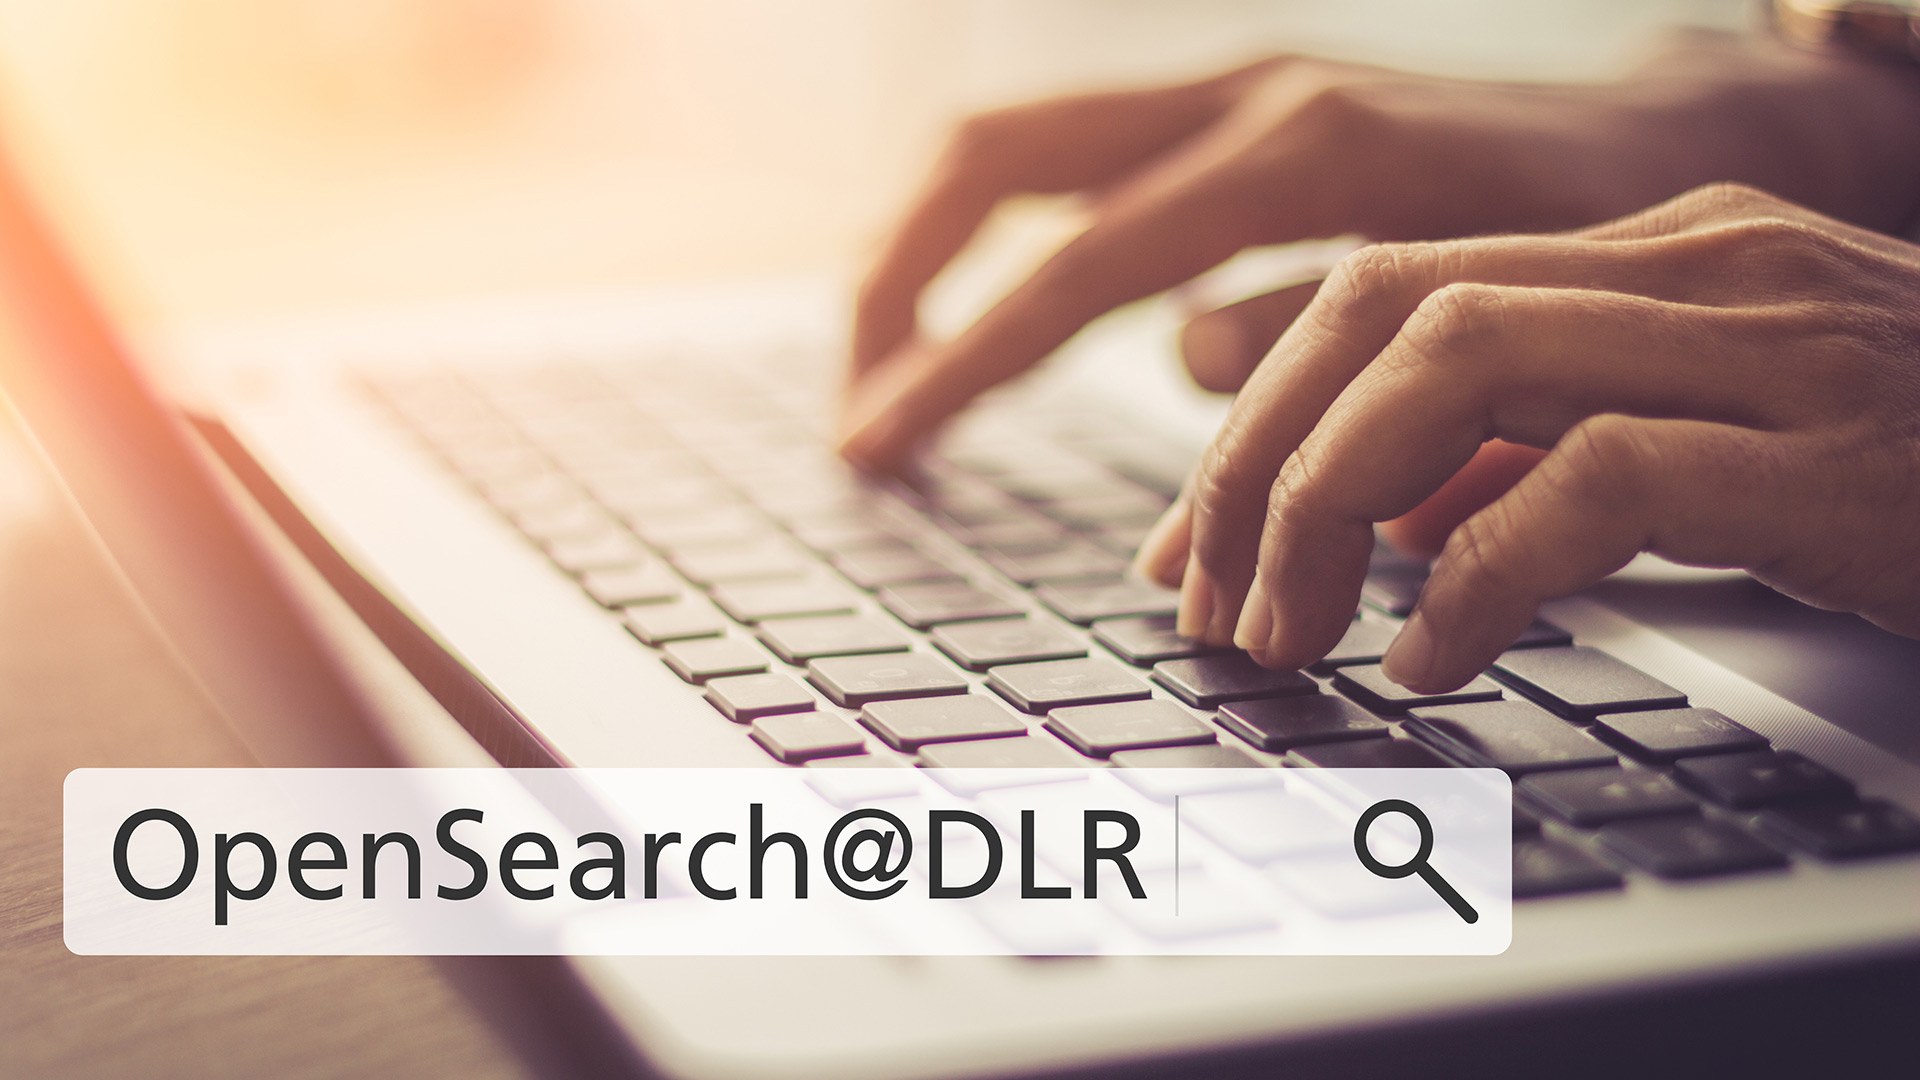 OpenSearch@DLR project